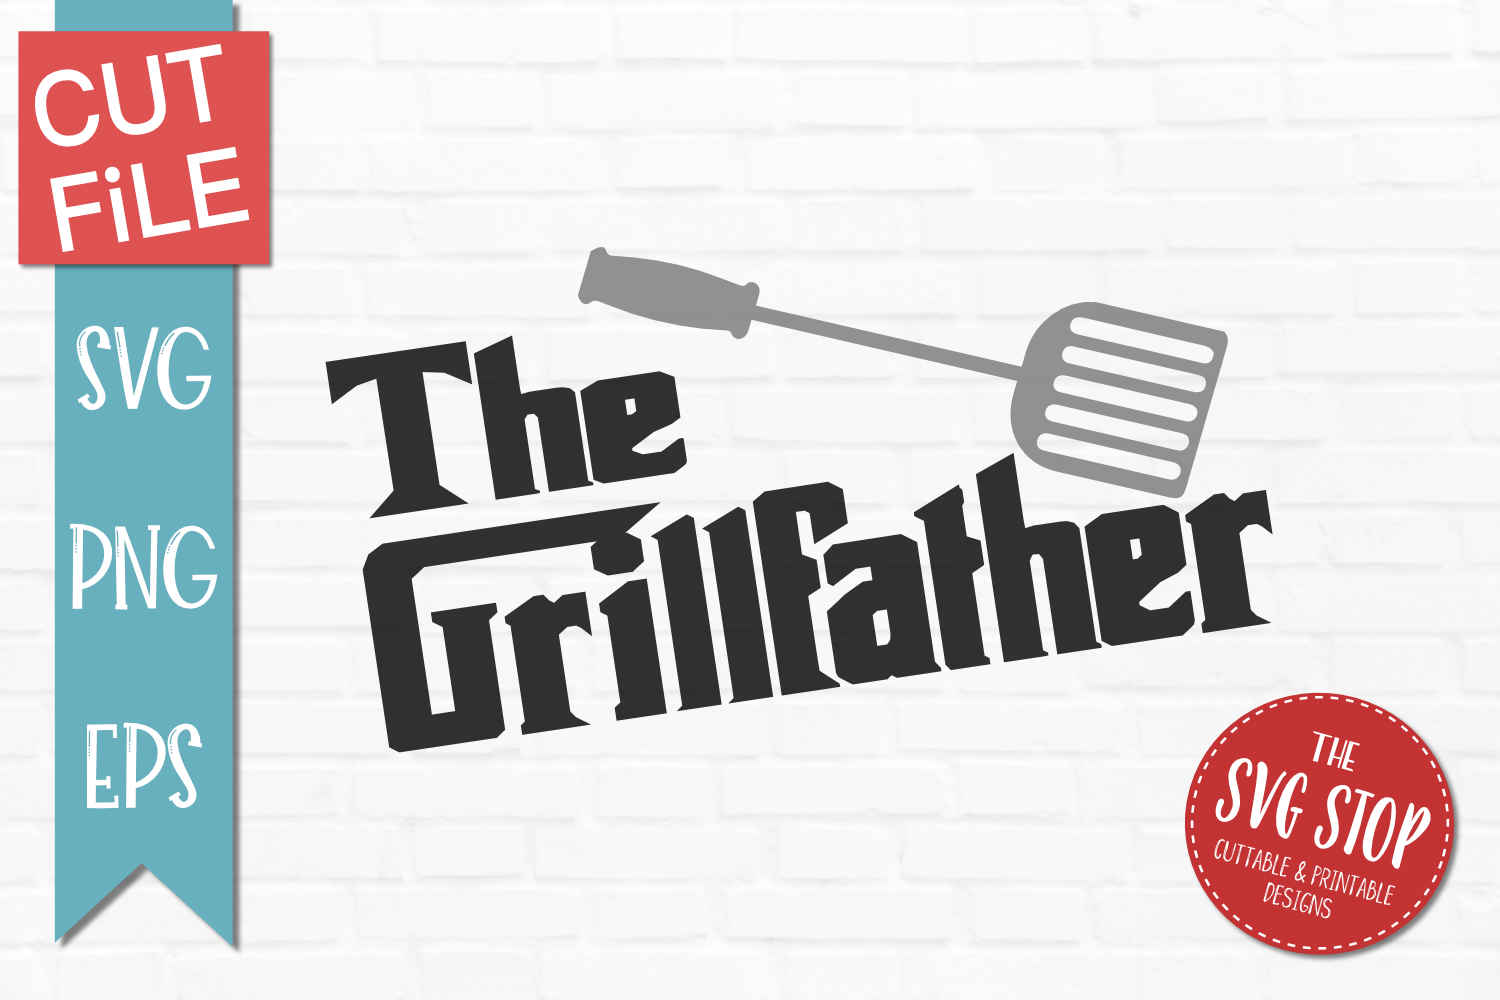 The Grillfather -SVG, PNG, EPS (312536) | SVGs | Design ...